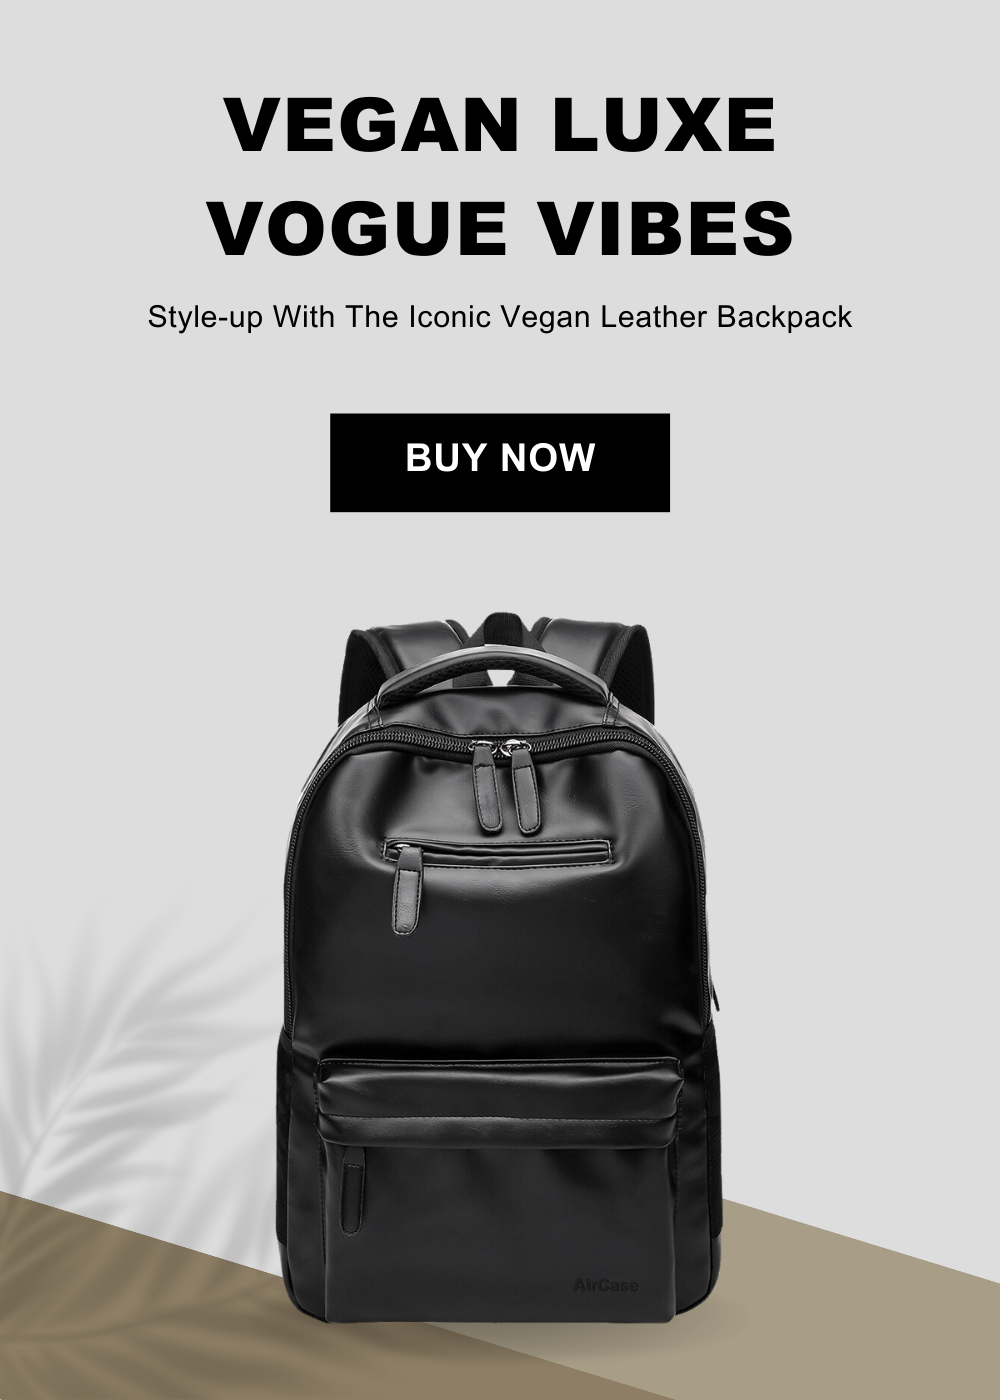 What luggage bag should I buy: American Tourister or SkyBags? - Quora